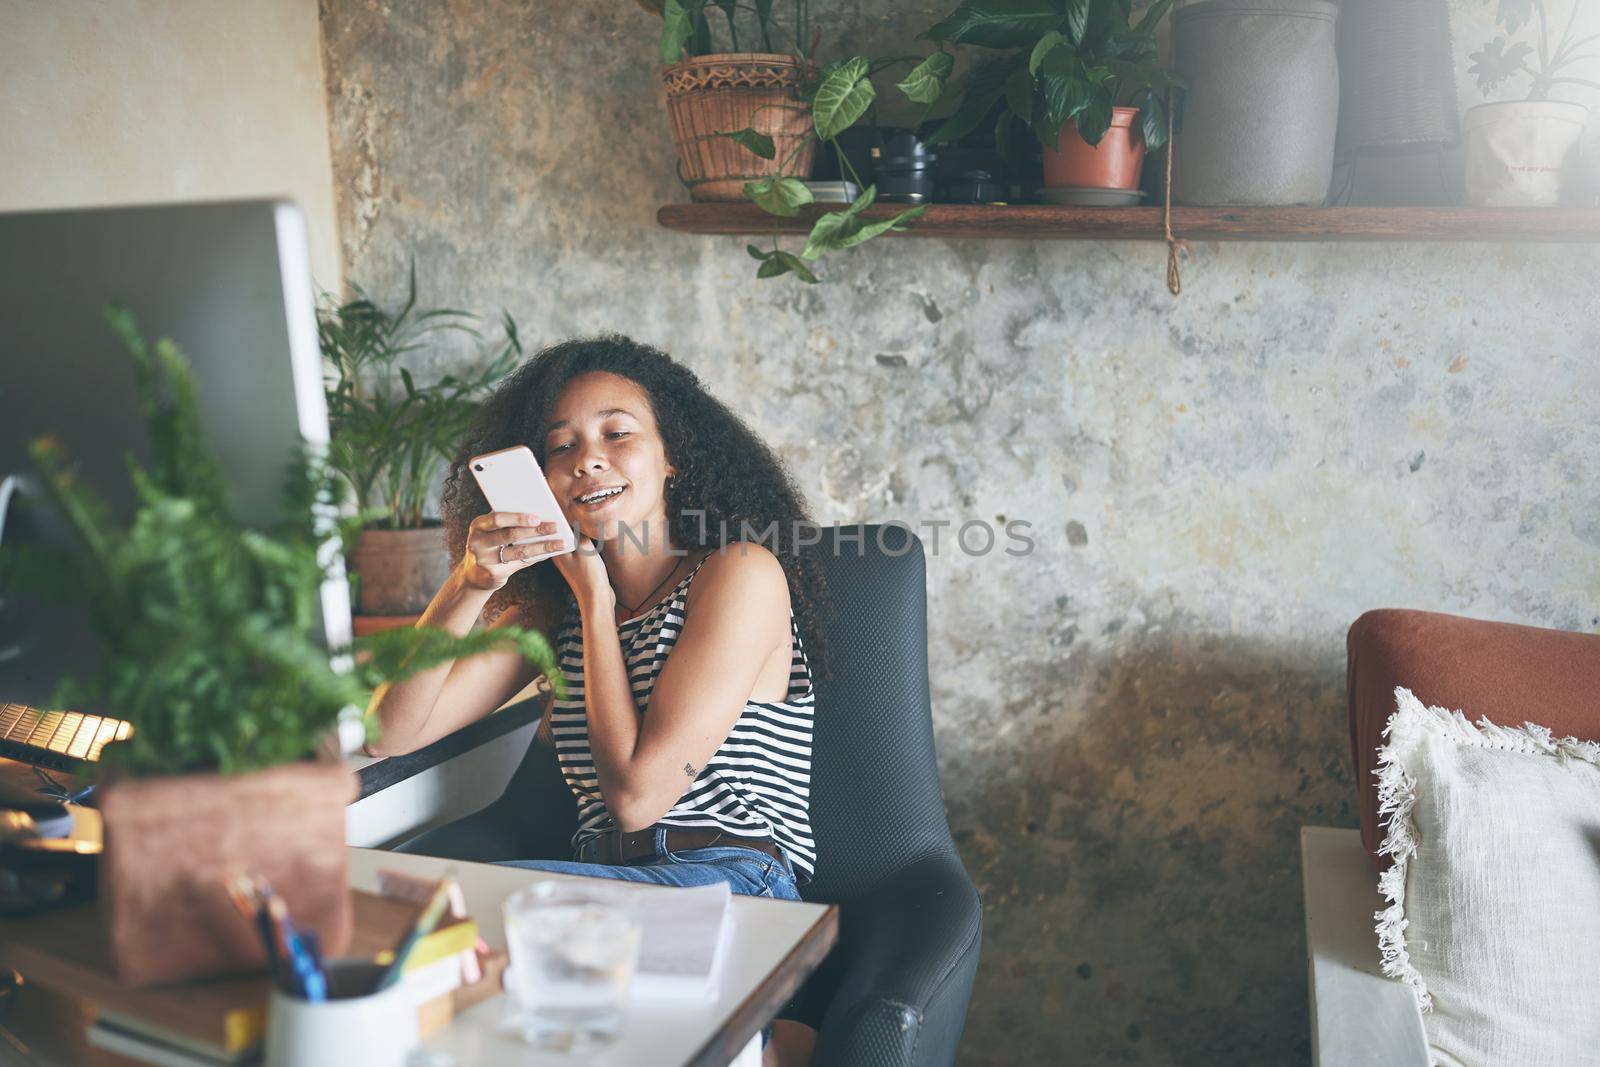 Shot of an attractive young woman sitting alone and using technology while working from home stock photo